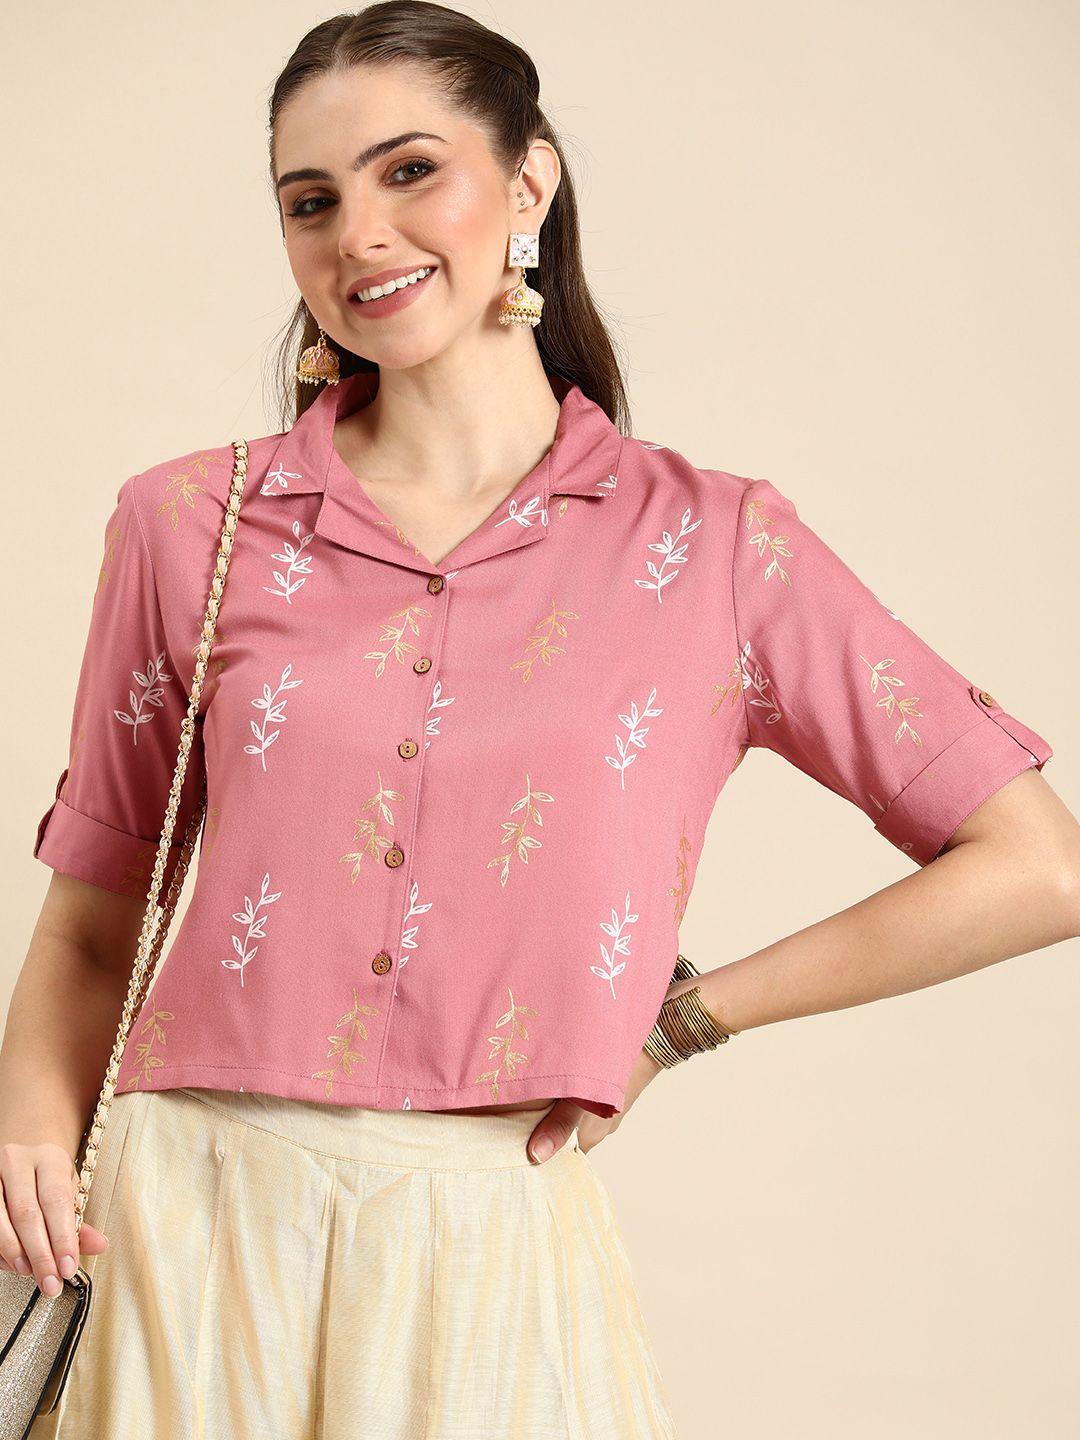 anouk-floral-print-roll-up-sleeves-shirt-style-crop-top